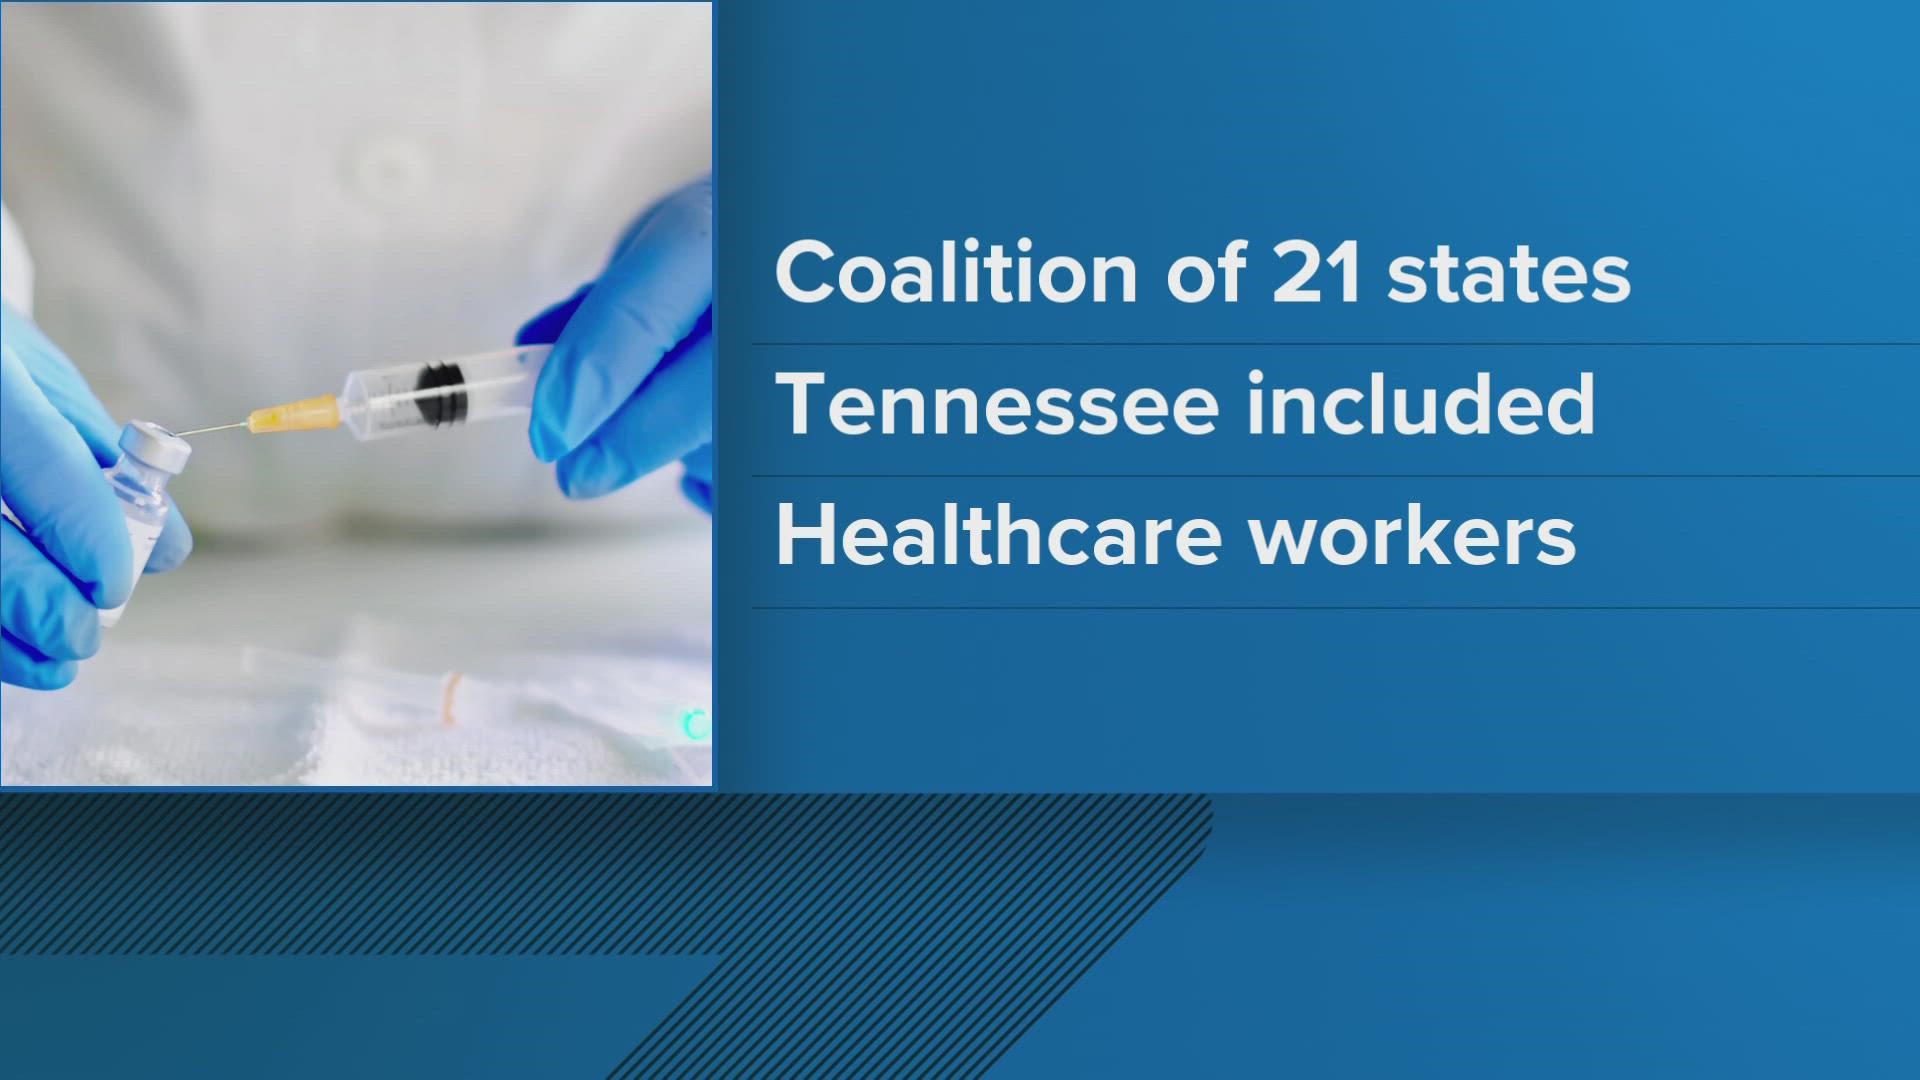 Tennessee Attorney General Jonathan Skrmetti joined with 20 other states to file a petition with the Department of Health and Human Services to stop the requirement.